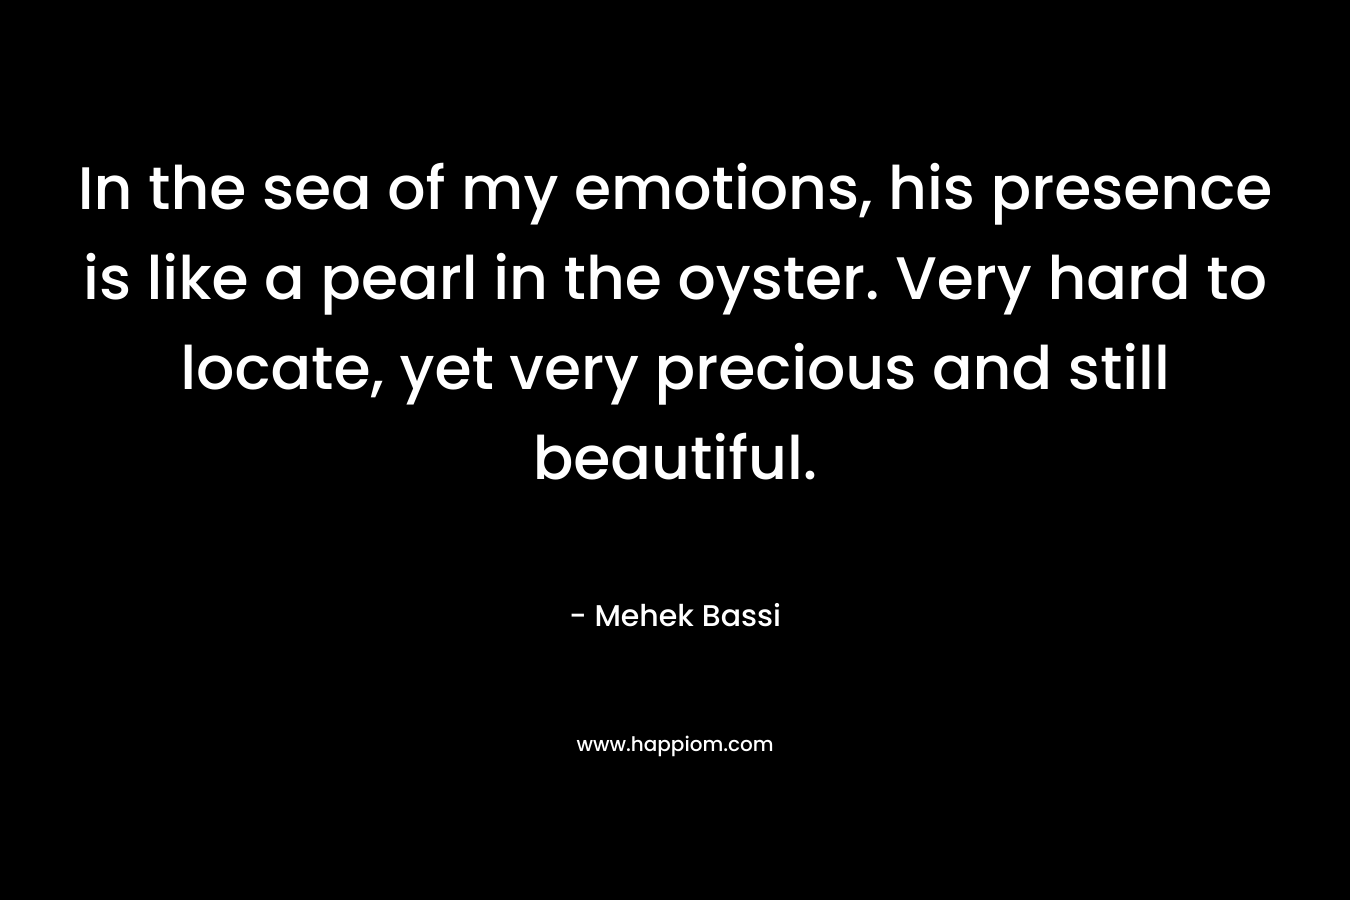 In the sea of my emotions, his presence is like a pearl in the oyster. Very hard to locate, yet very precious and still beautiful. – Mehek Bassi